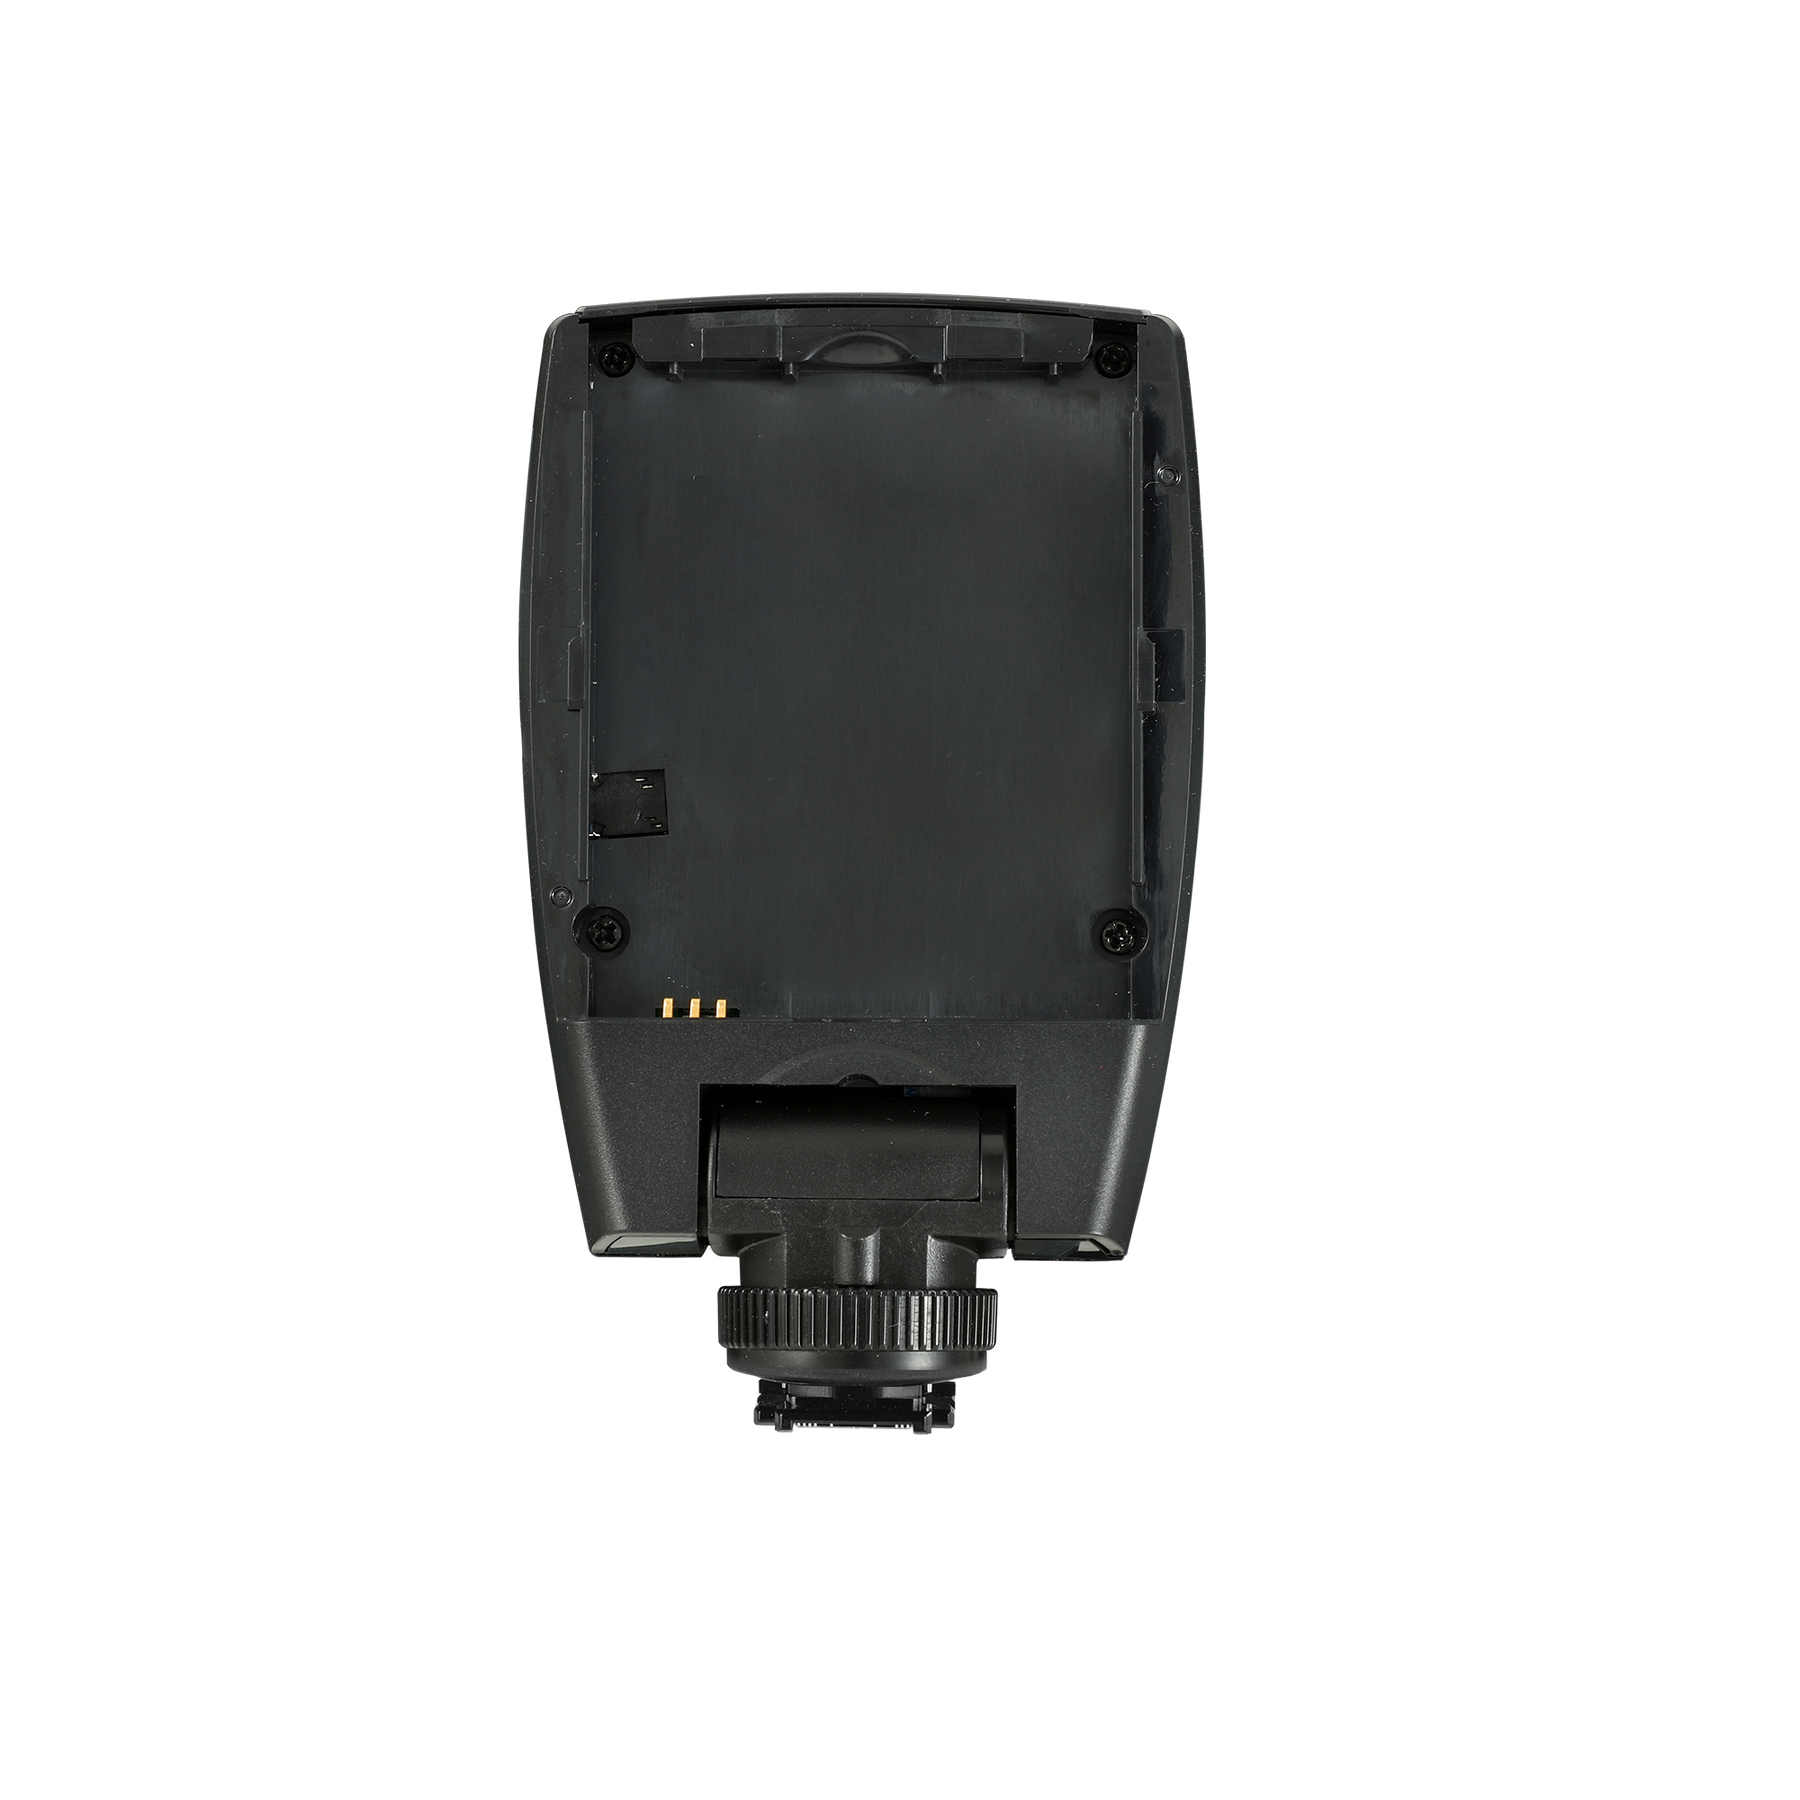 TR-Q7II Sony wireless transmitter for studio flashes